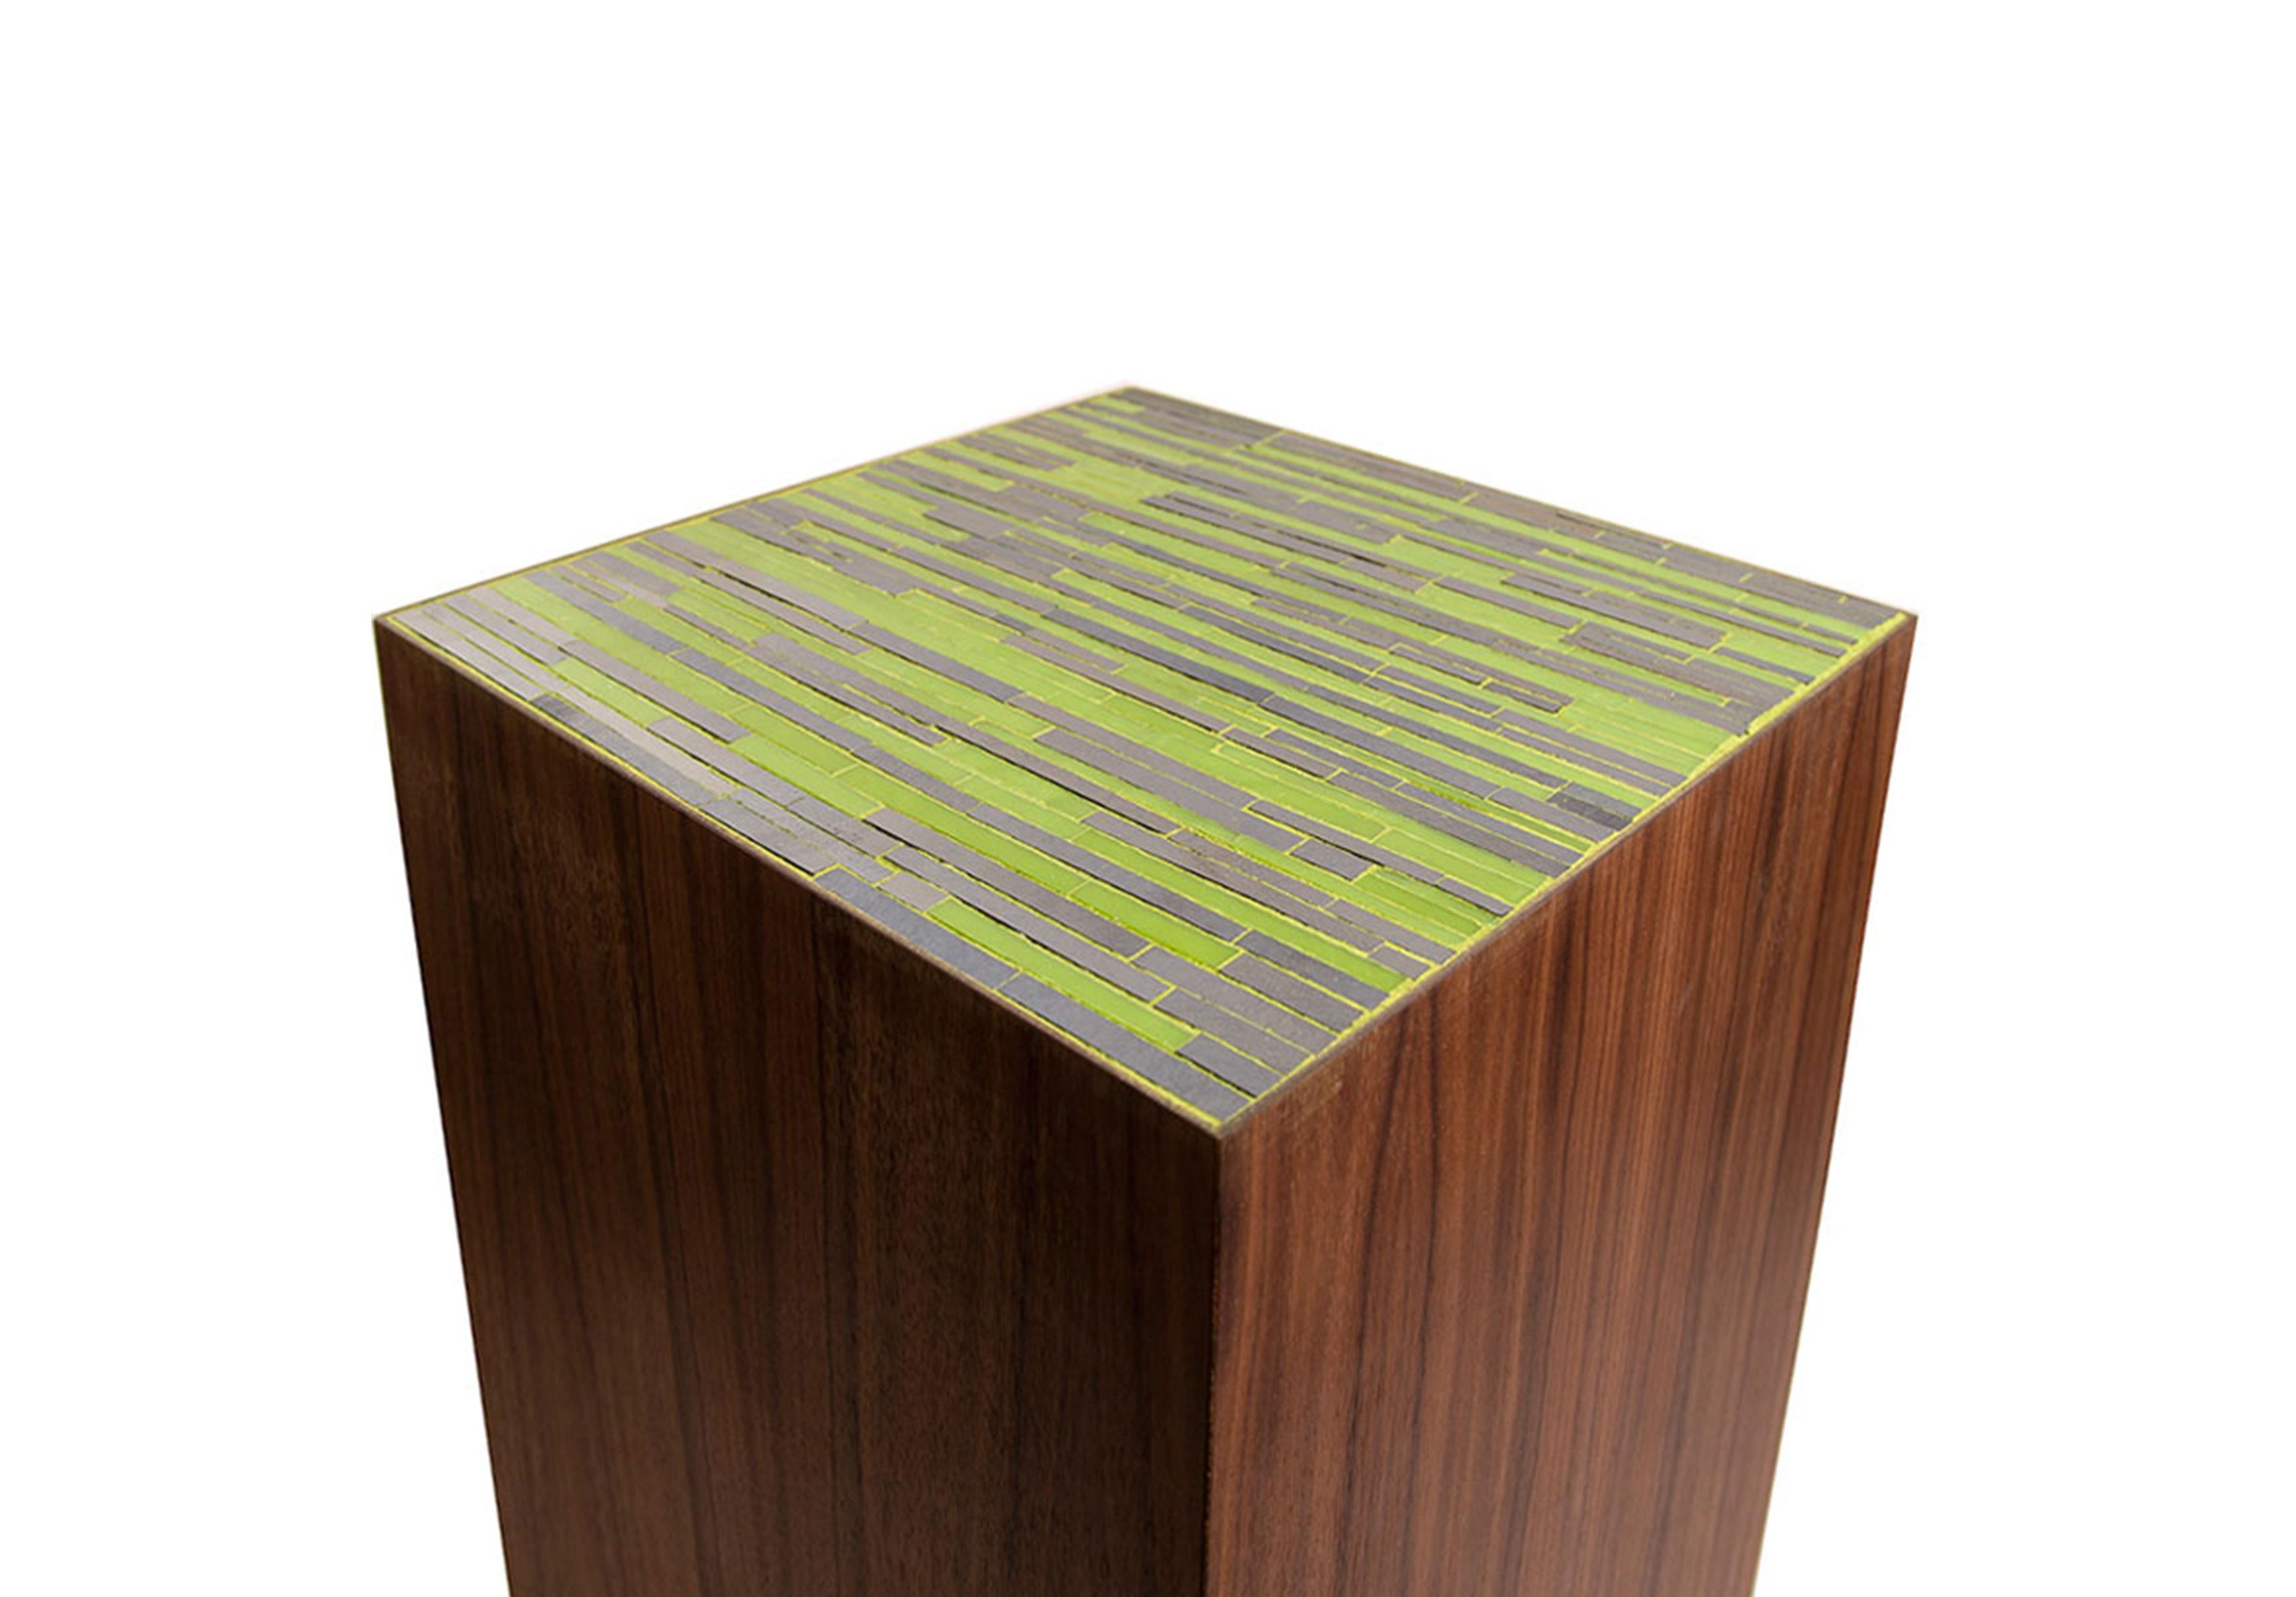 The Natura Pedestal by Ercole Home has a natural wood finish on walnut. Handcut glass mosaics in apple green and black mother of pearl glass mosaic decorate the top surface in Facets pattern.
Custom sizes and finishes are available.
Made in New York